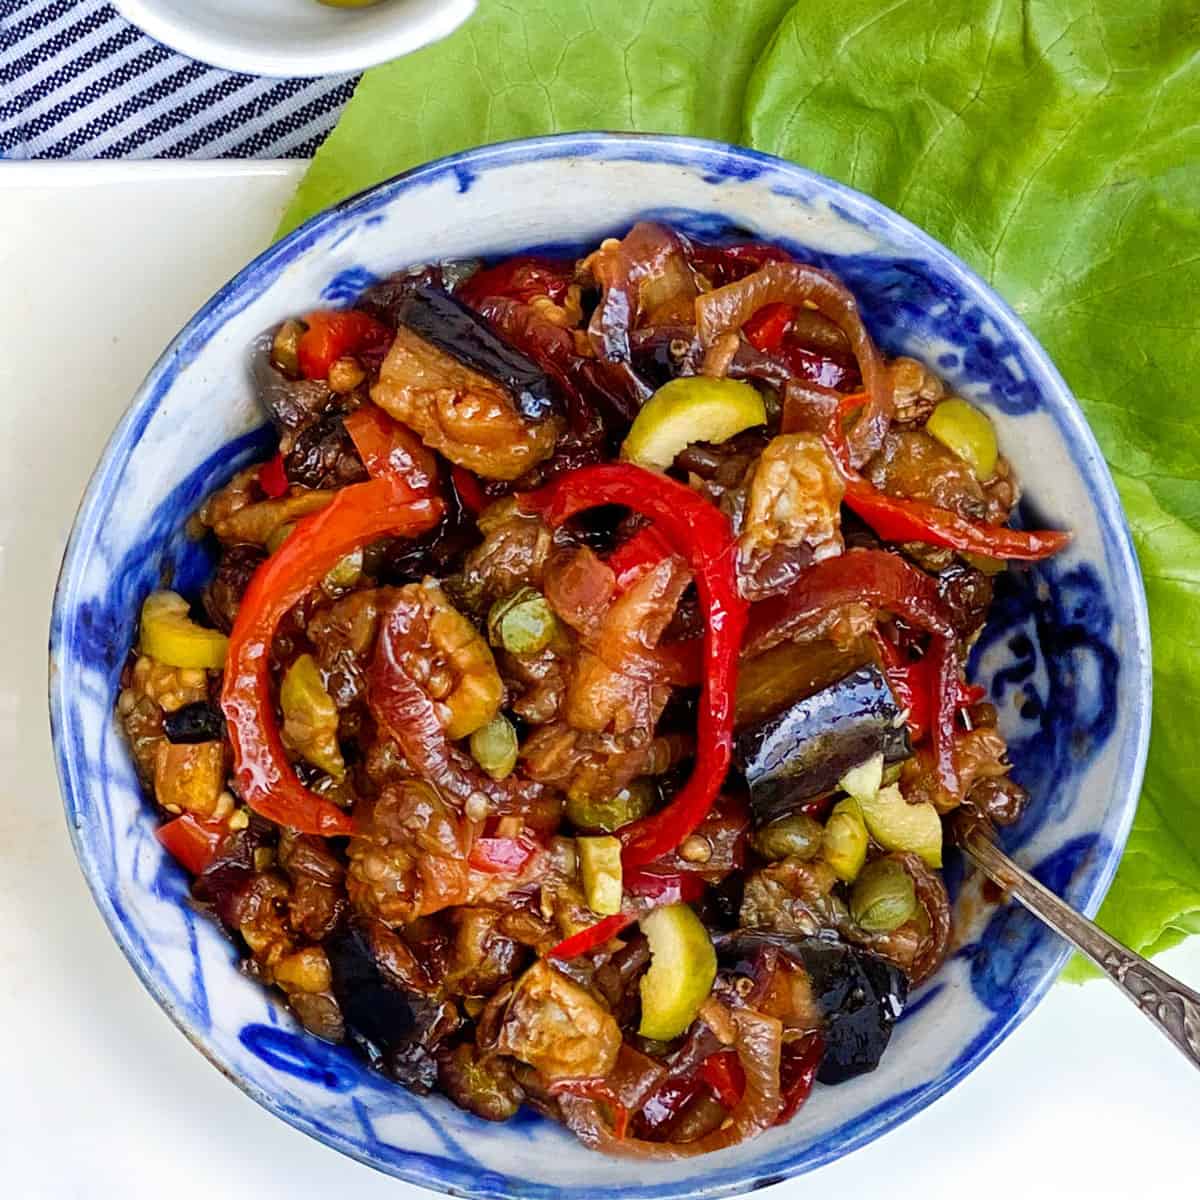 caponata - eggplant relish with bell peppers, olives, capers and onions - in a ceramic bowl with a silver spoon